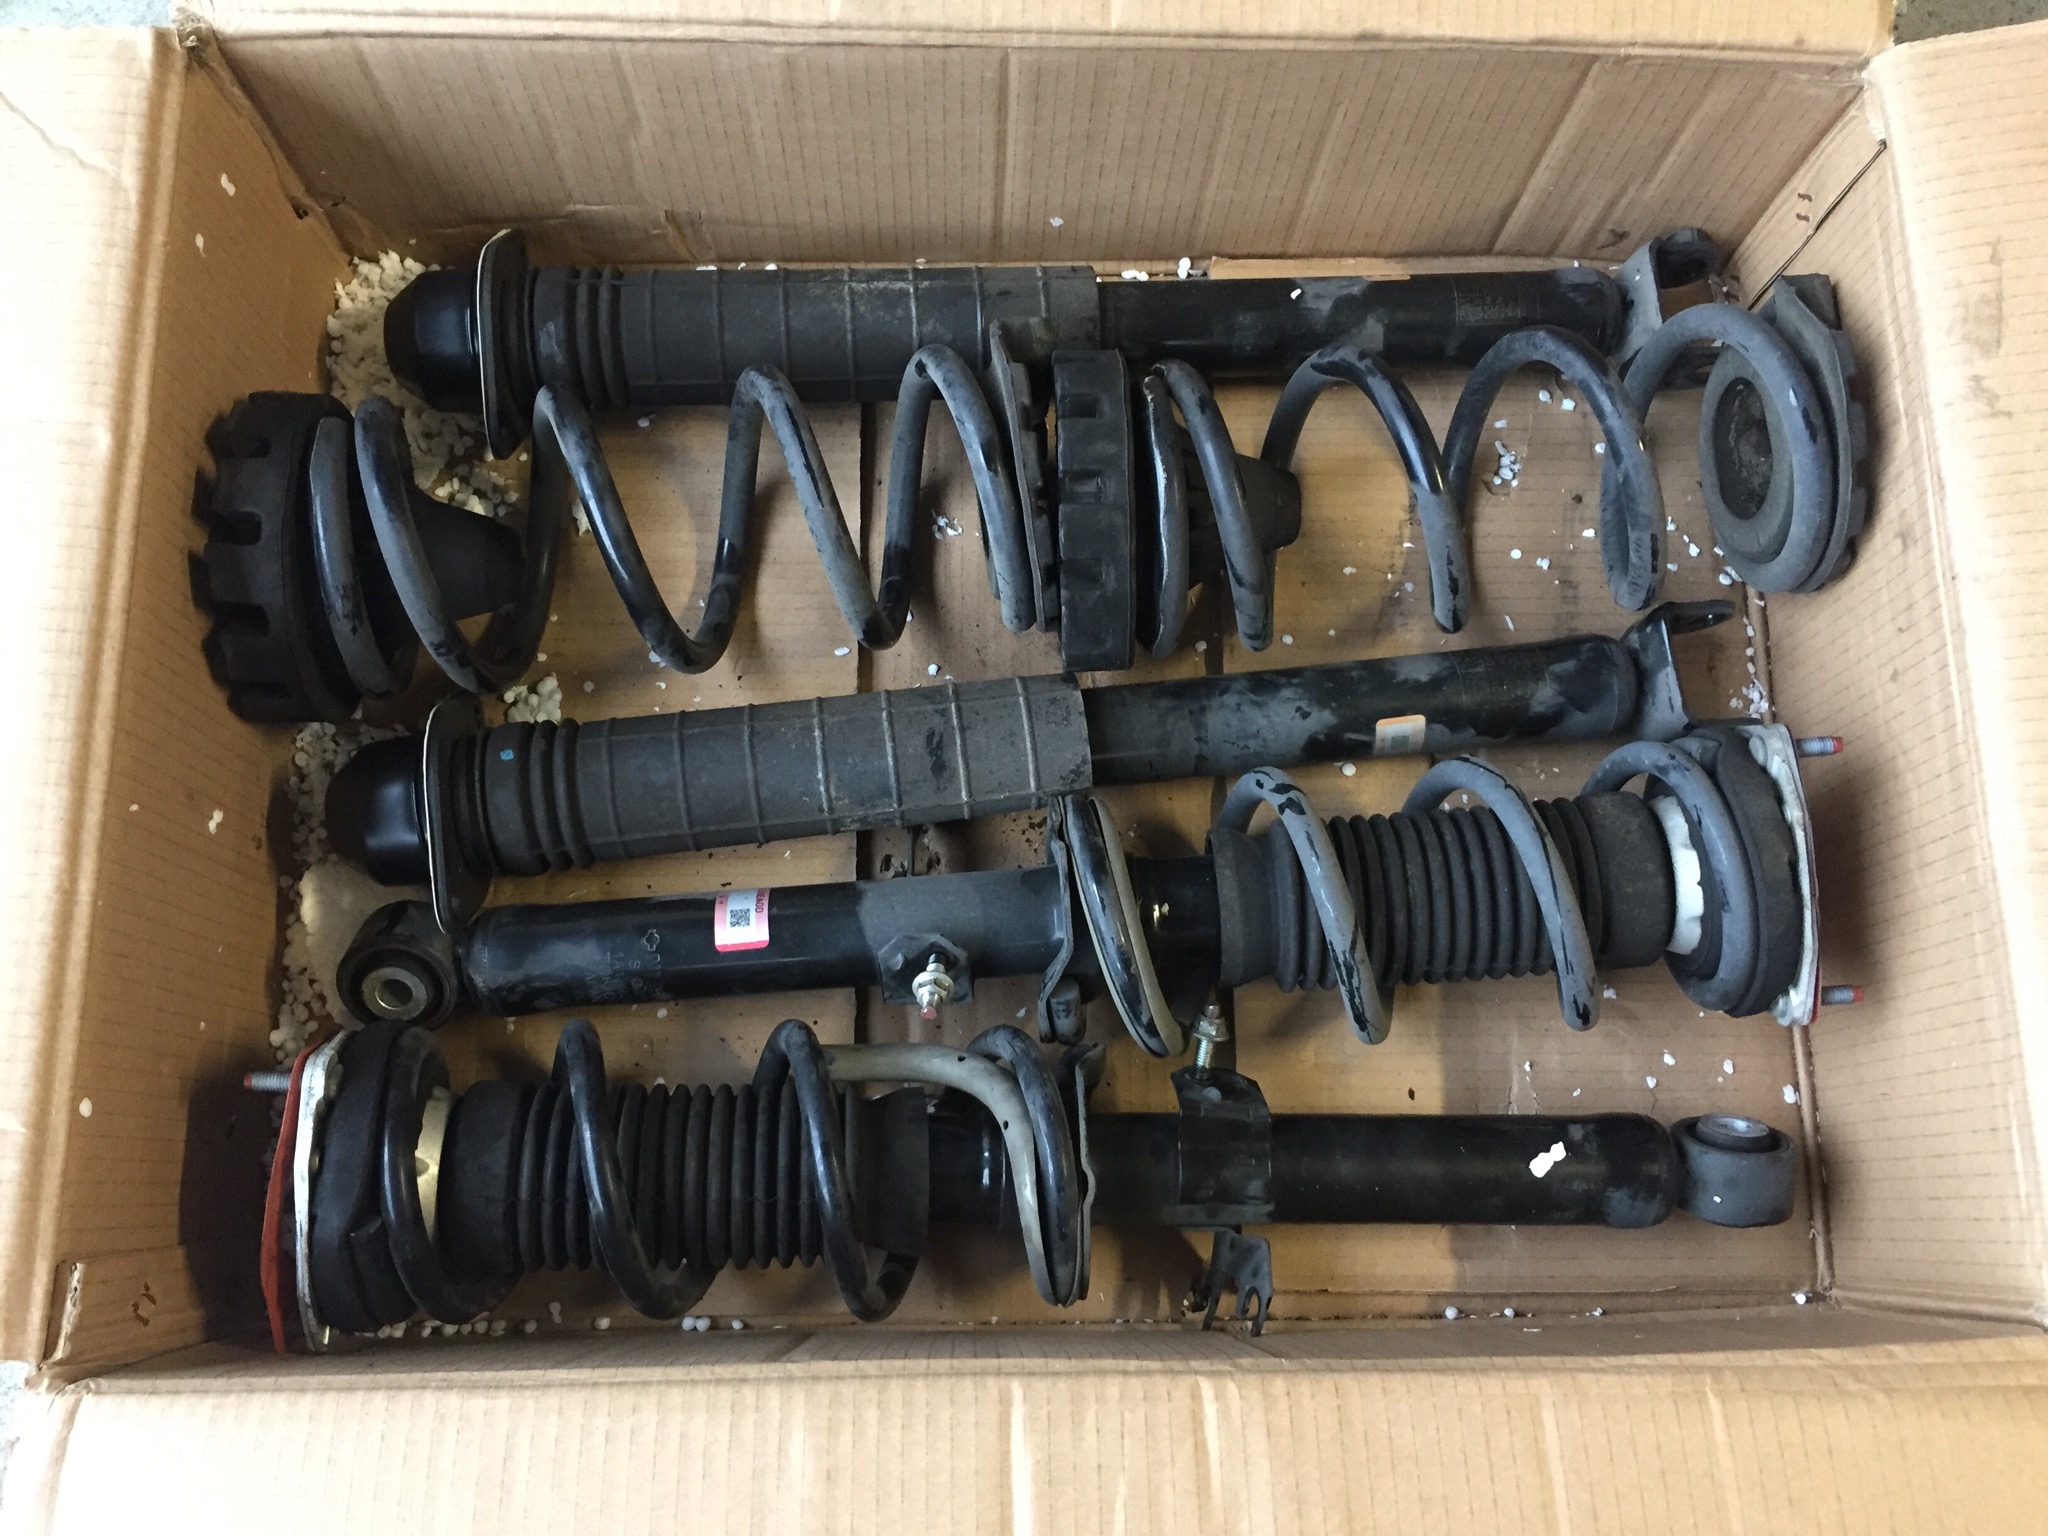 2009 - 2016 Nissan 370z Parts! MUST Sell!